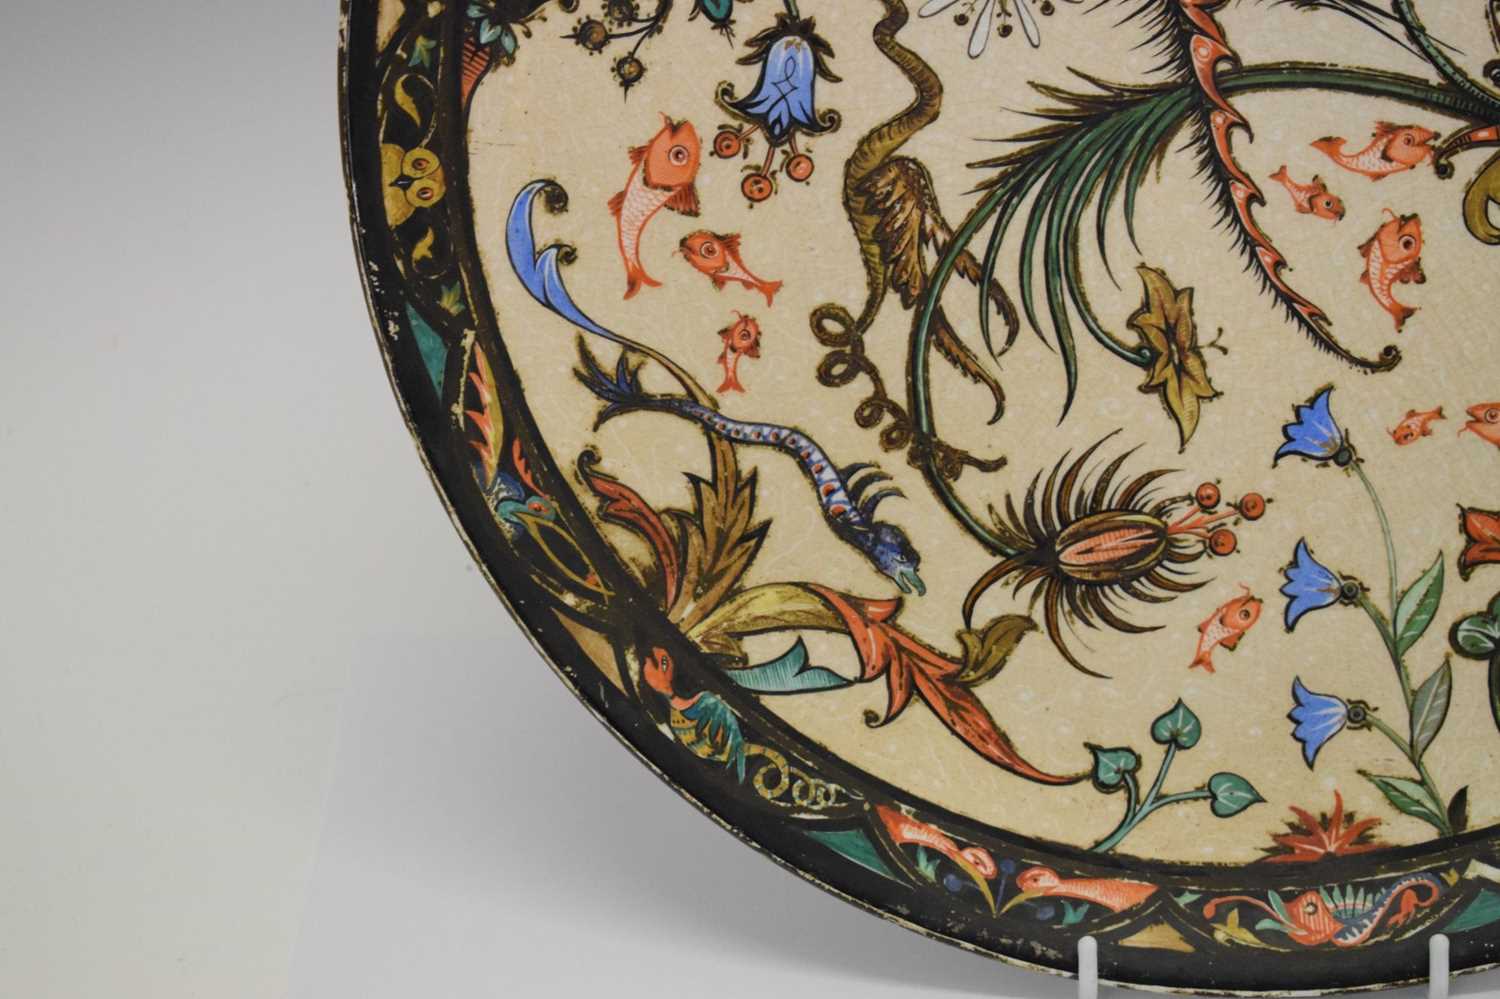 Aesthetic Charger 'Japanese Design, Howell & James Art Pottery Exhibition 1885' - Image 2 of 8